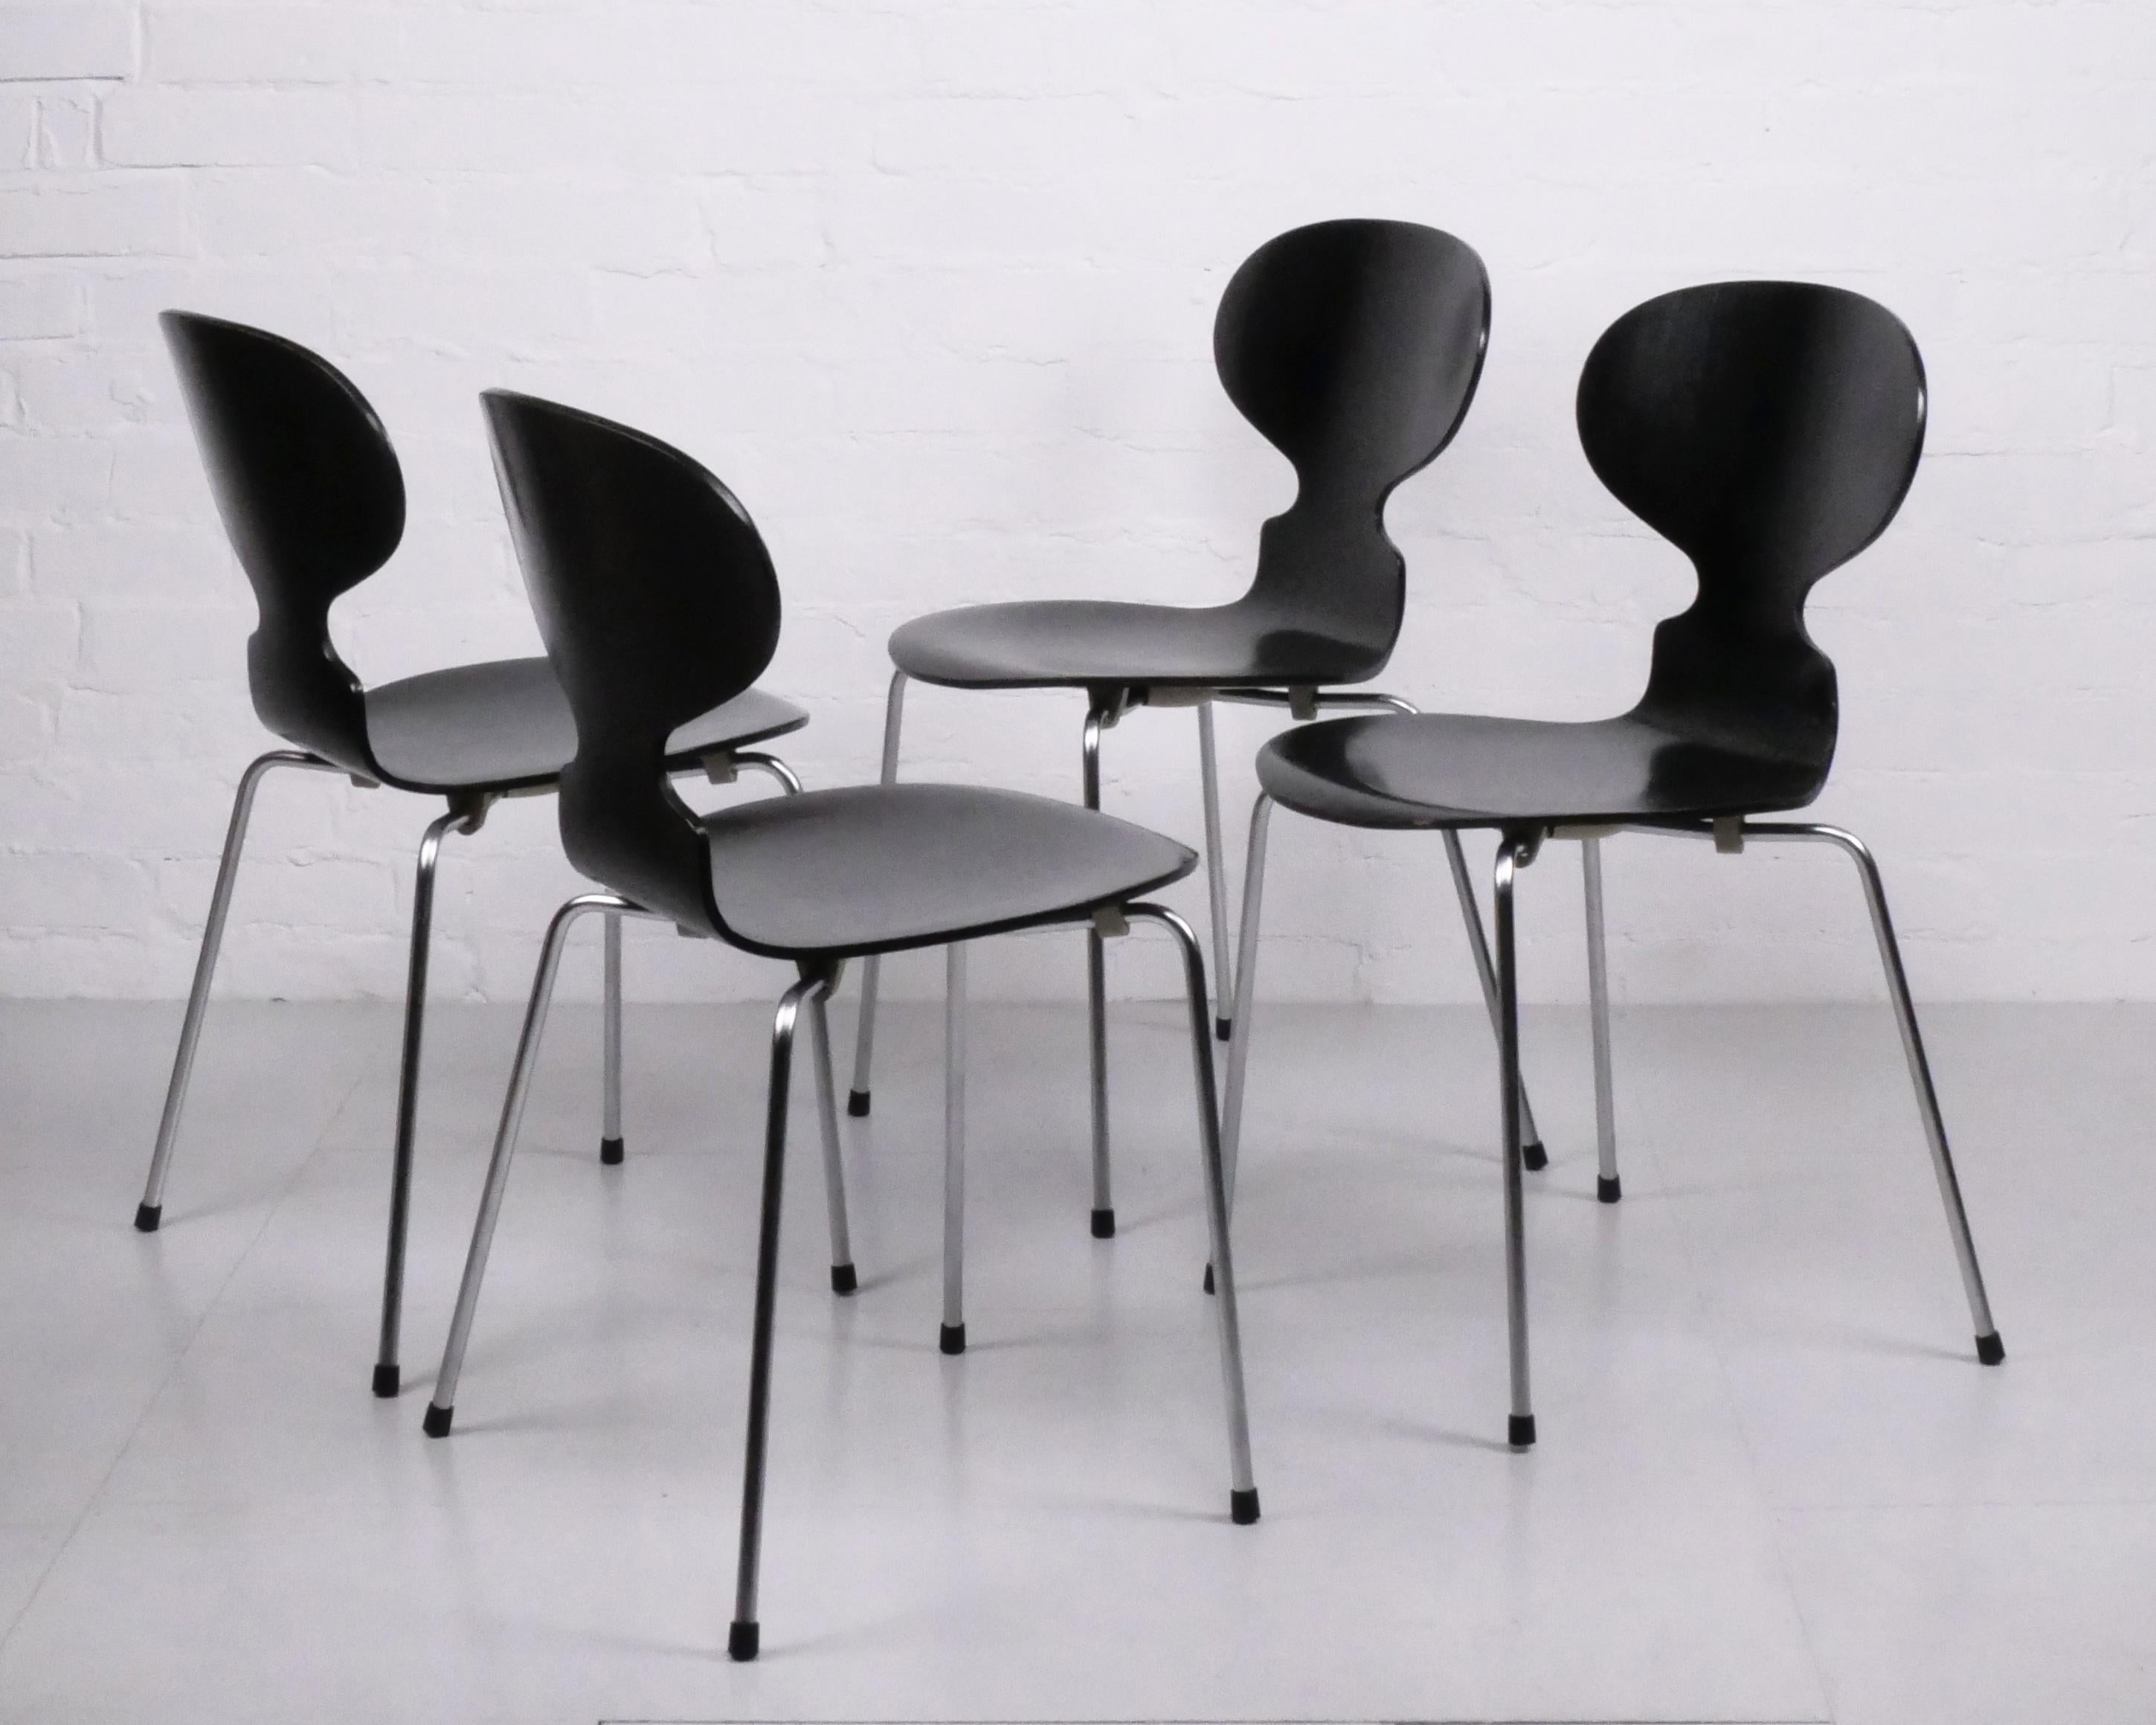 Mid-Century Modern Set of 4 ‘Ant’ Chairs by Arne Jacobsen for Fritz Hansen, 2 early sets available